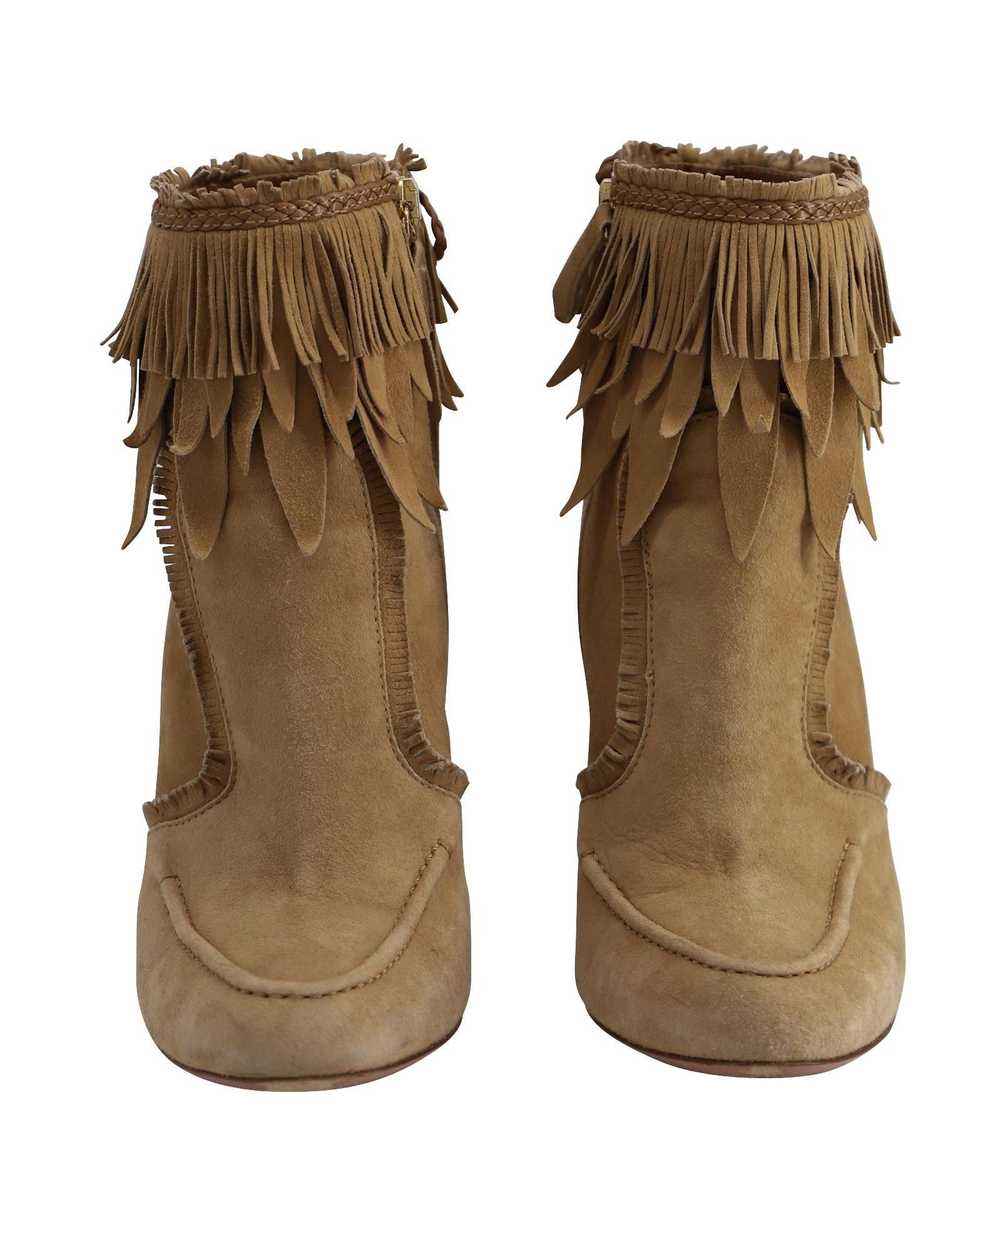 Aquazzura Fringed Beige Suede Ankle Boots with Bl… - image 2